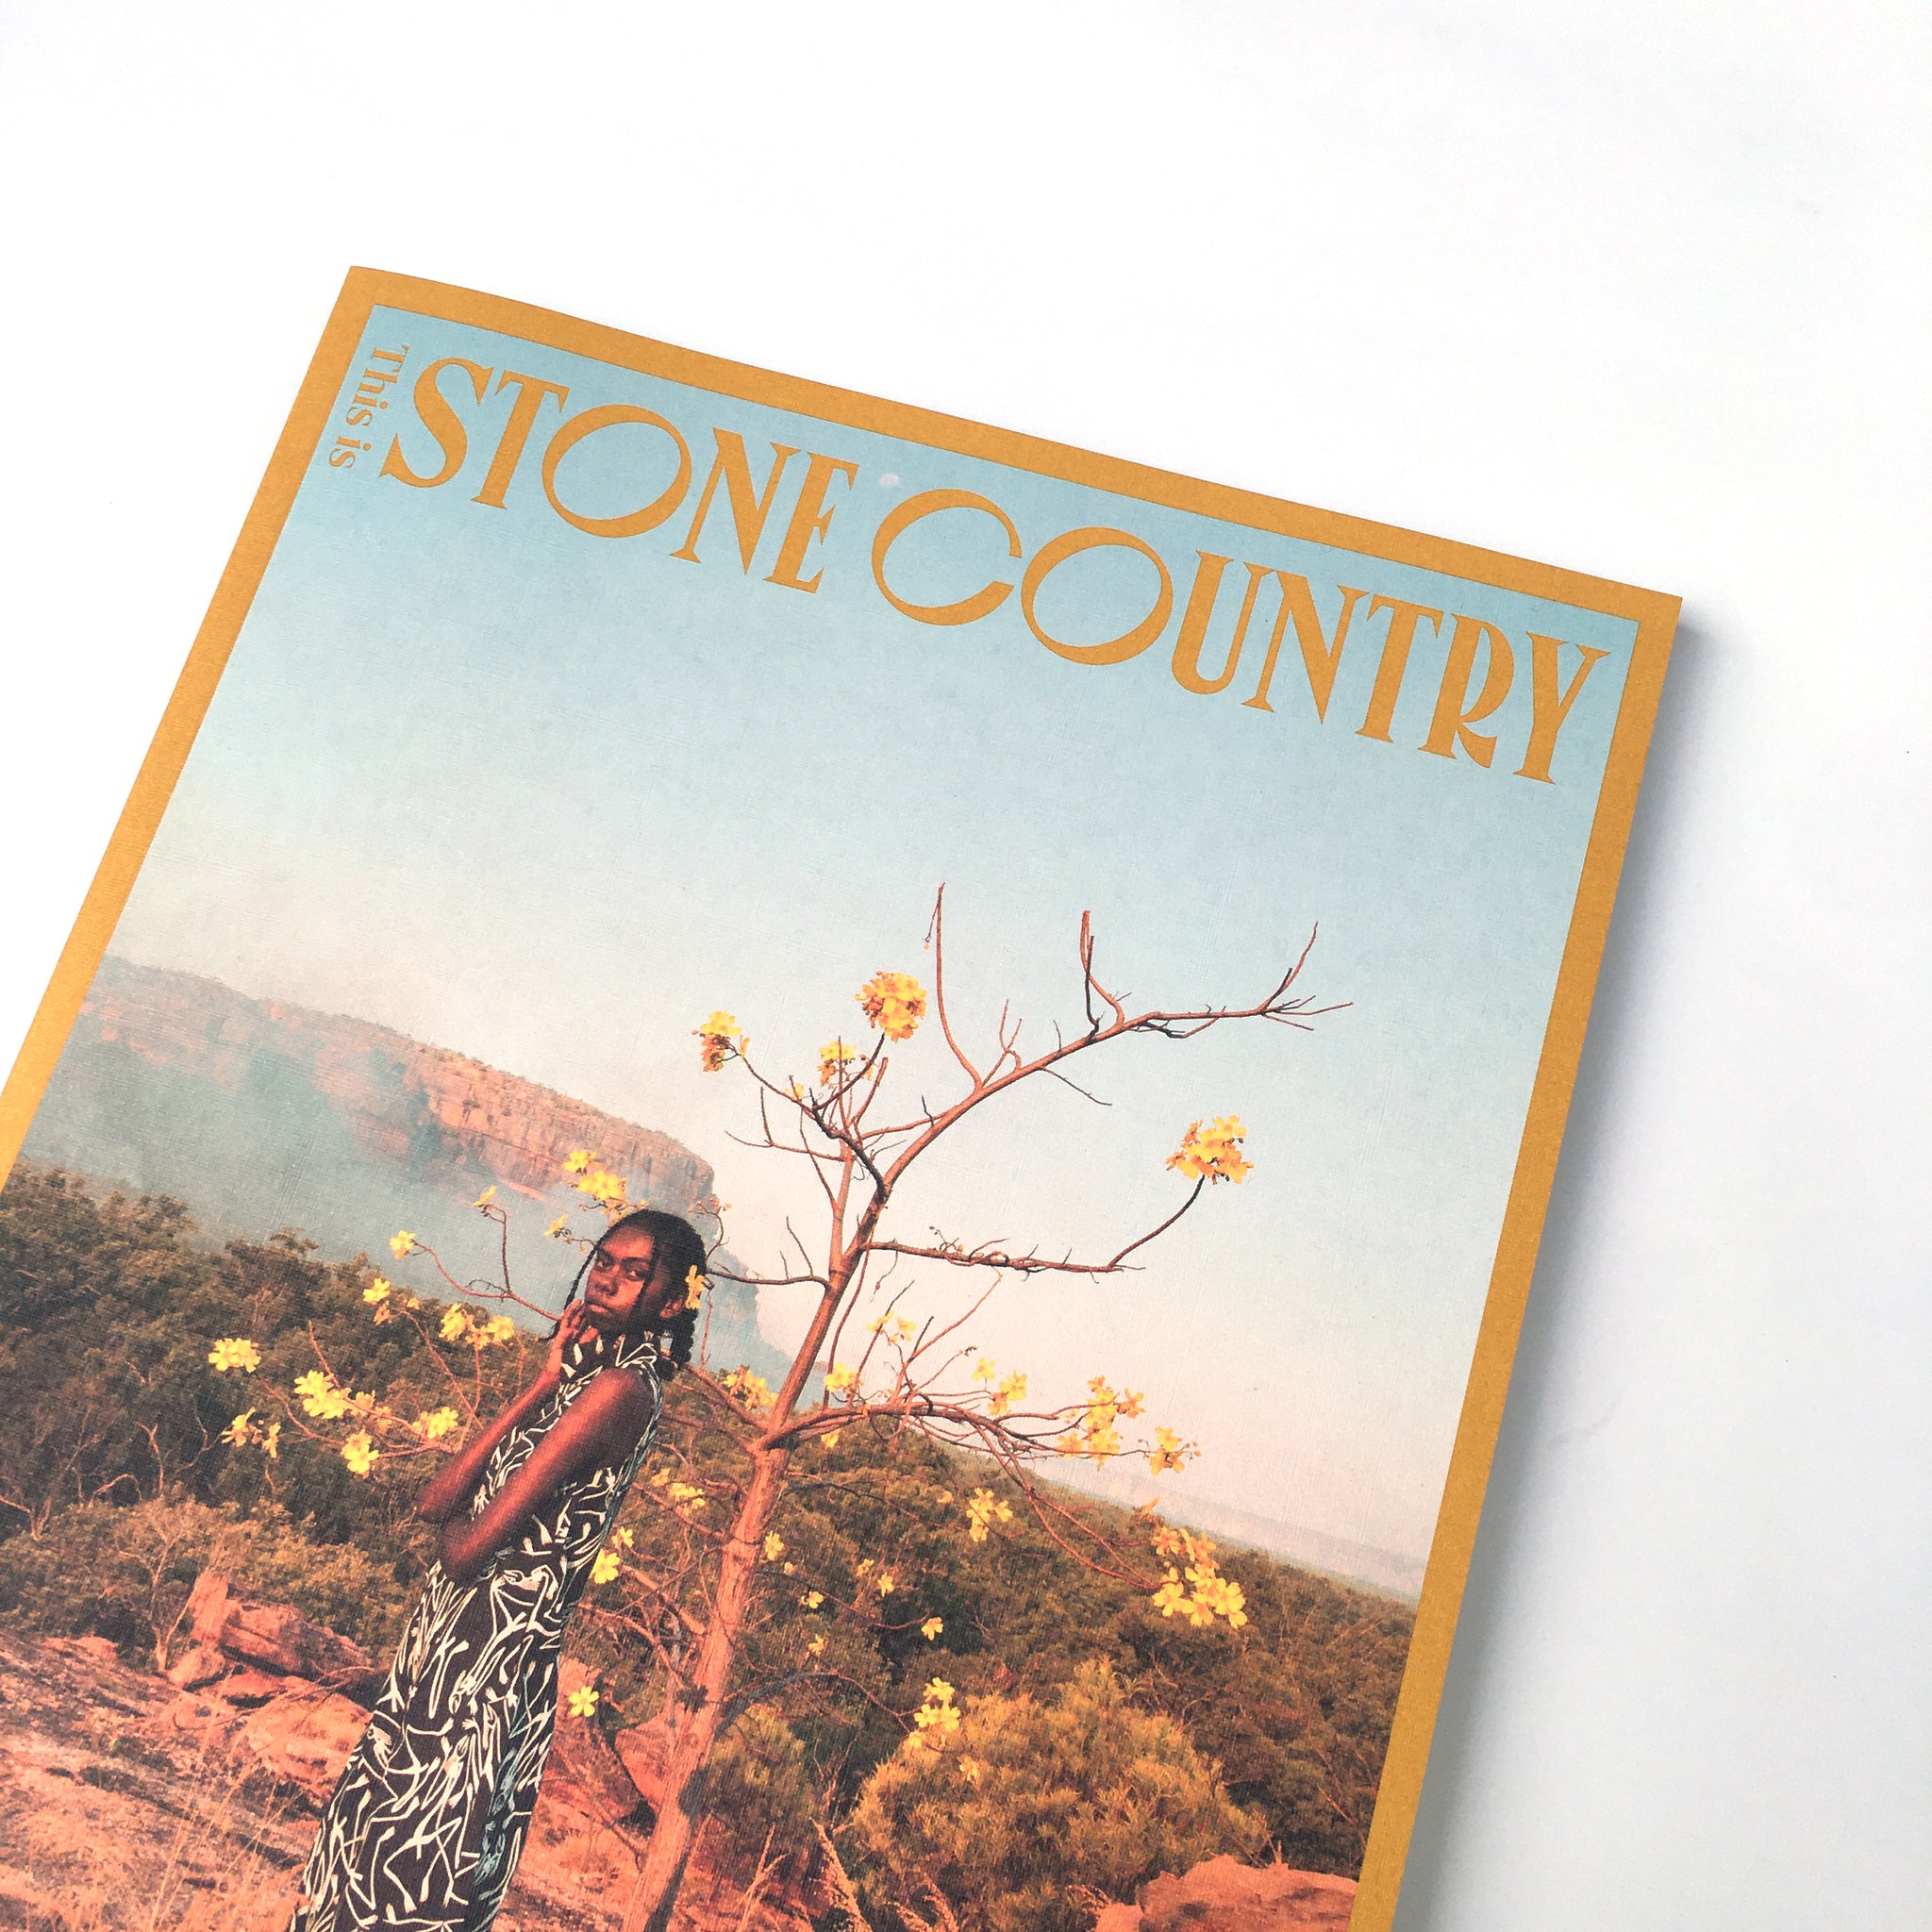 "This is Stone Country" Print Publication